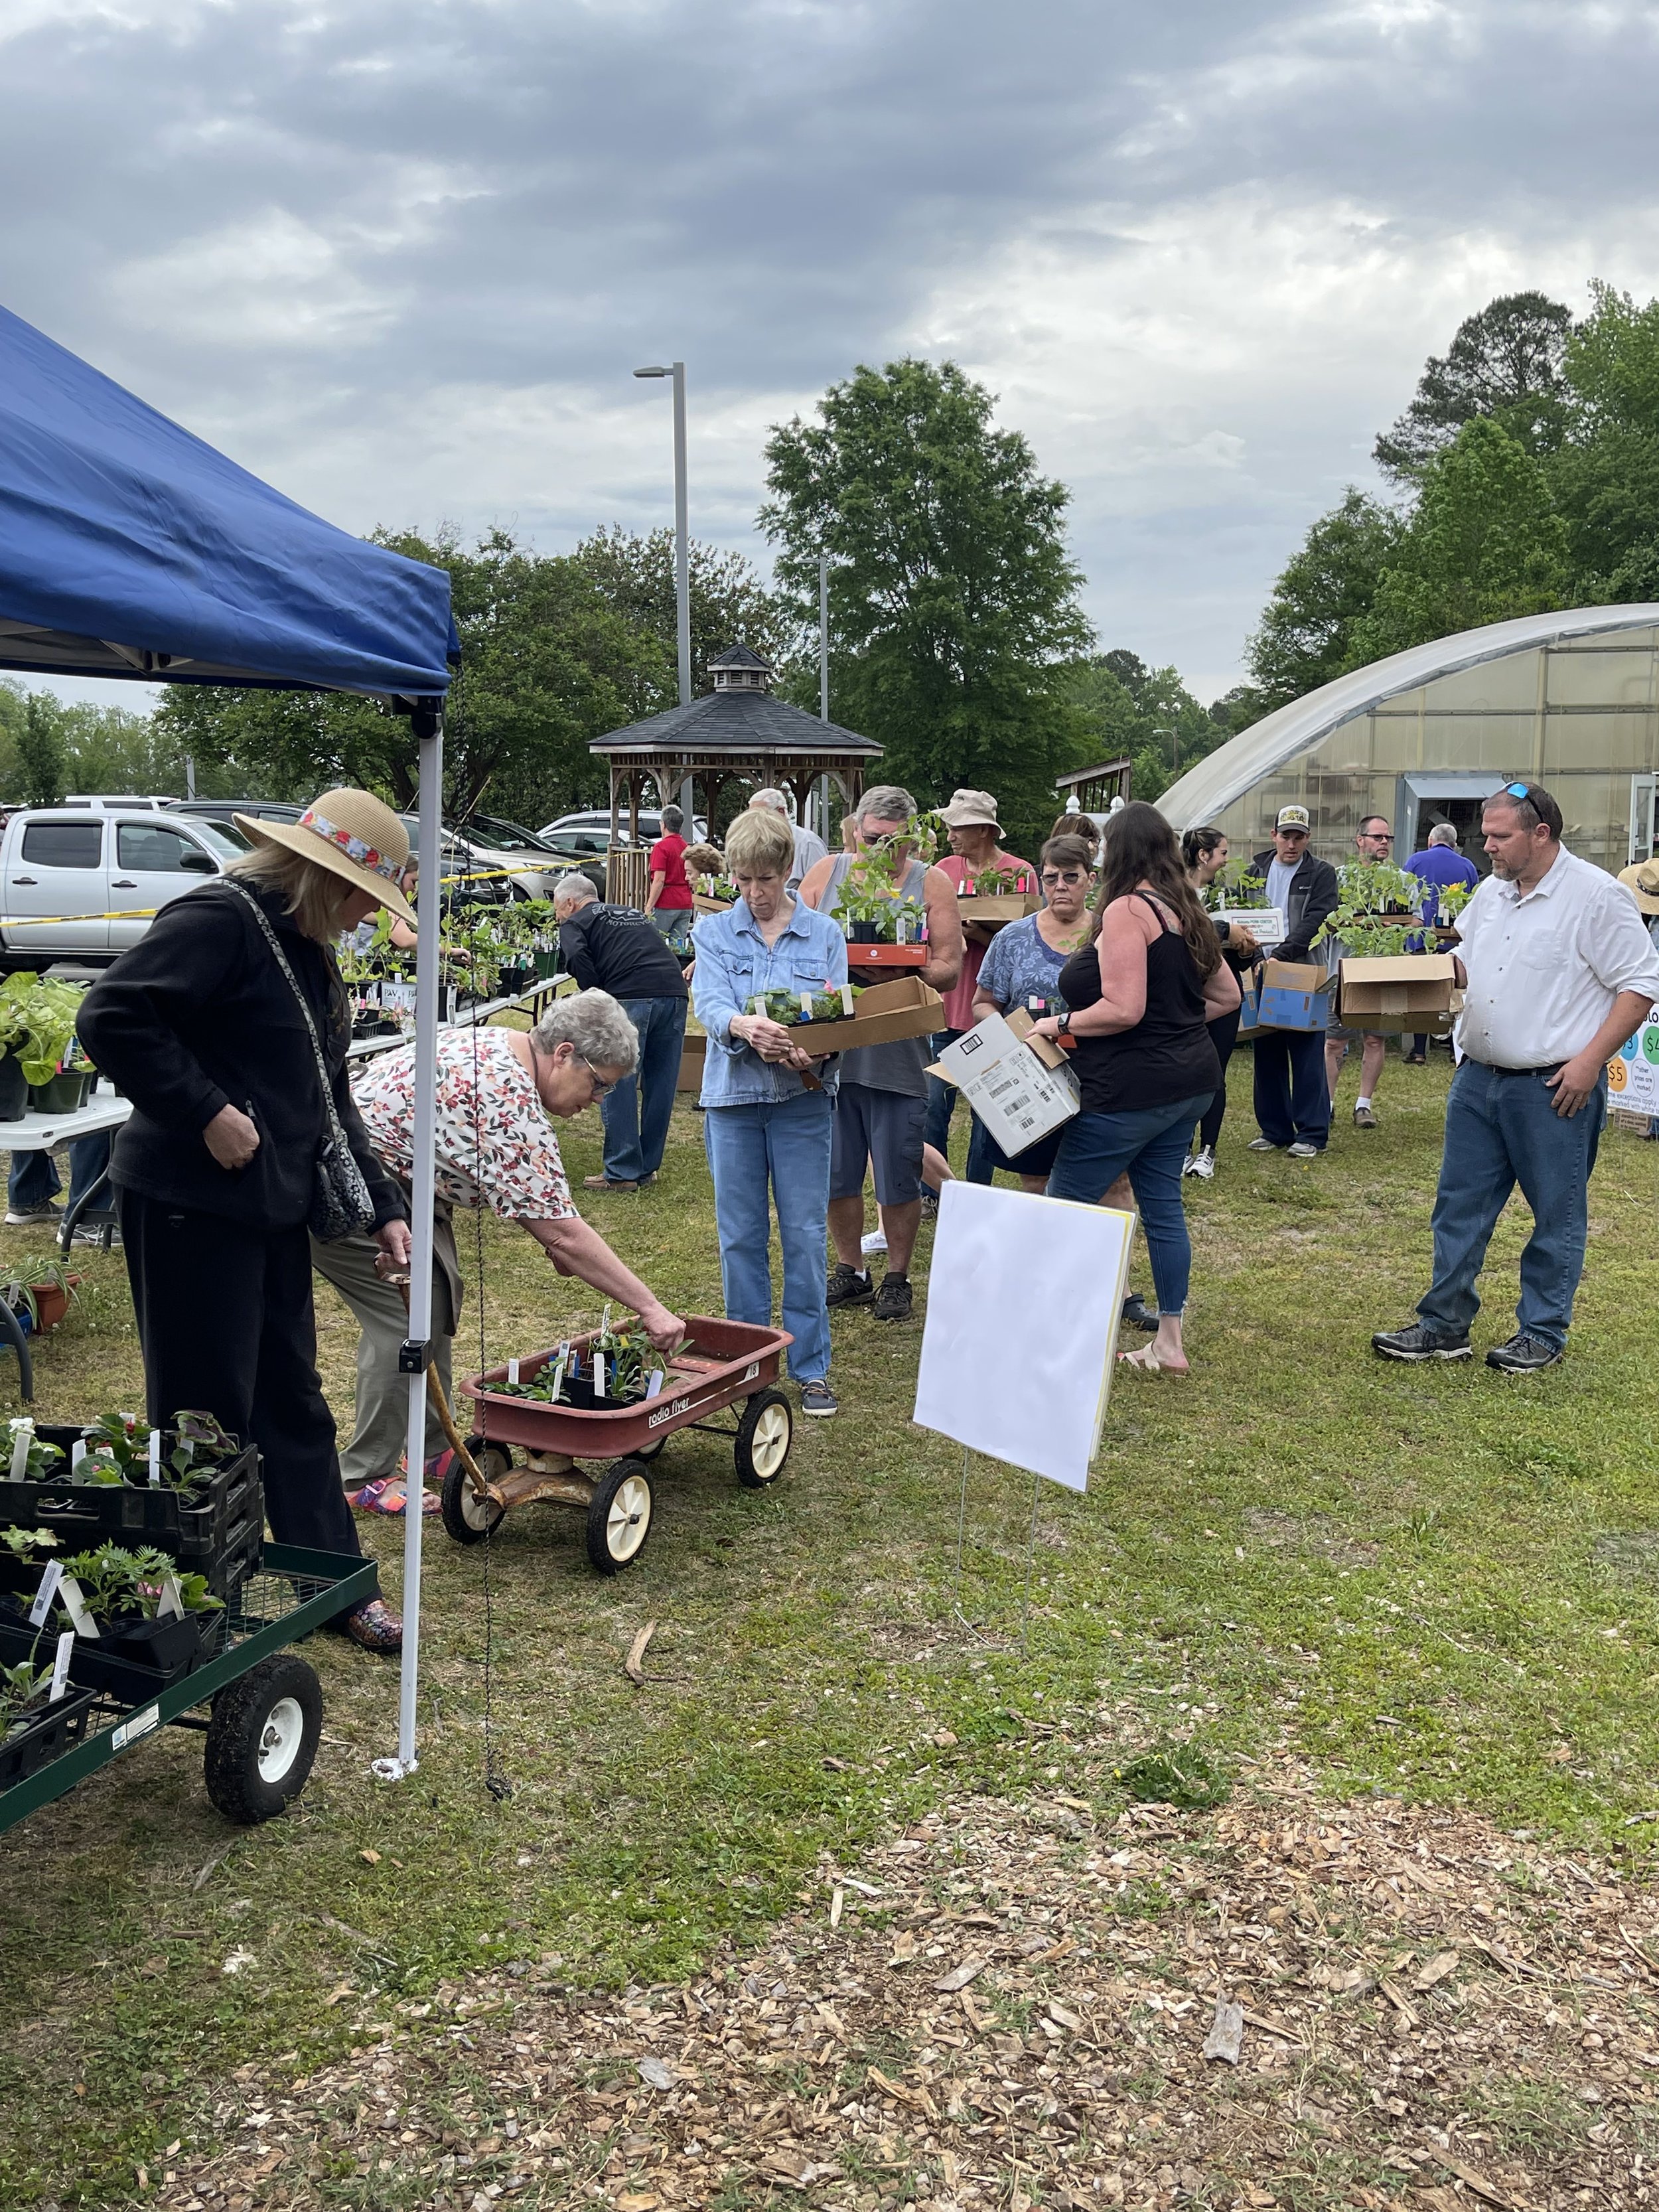 Shortly after "opening" the sale Saturday morning the checkout line was beginning to form! Many happy customers were ready to take home their purchases and get planting.